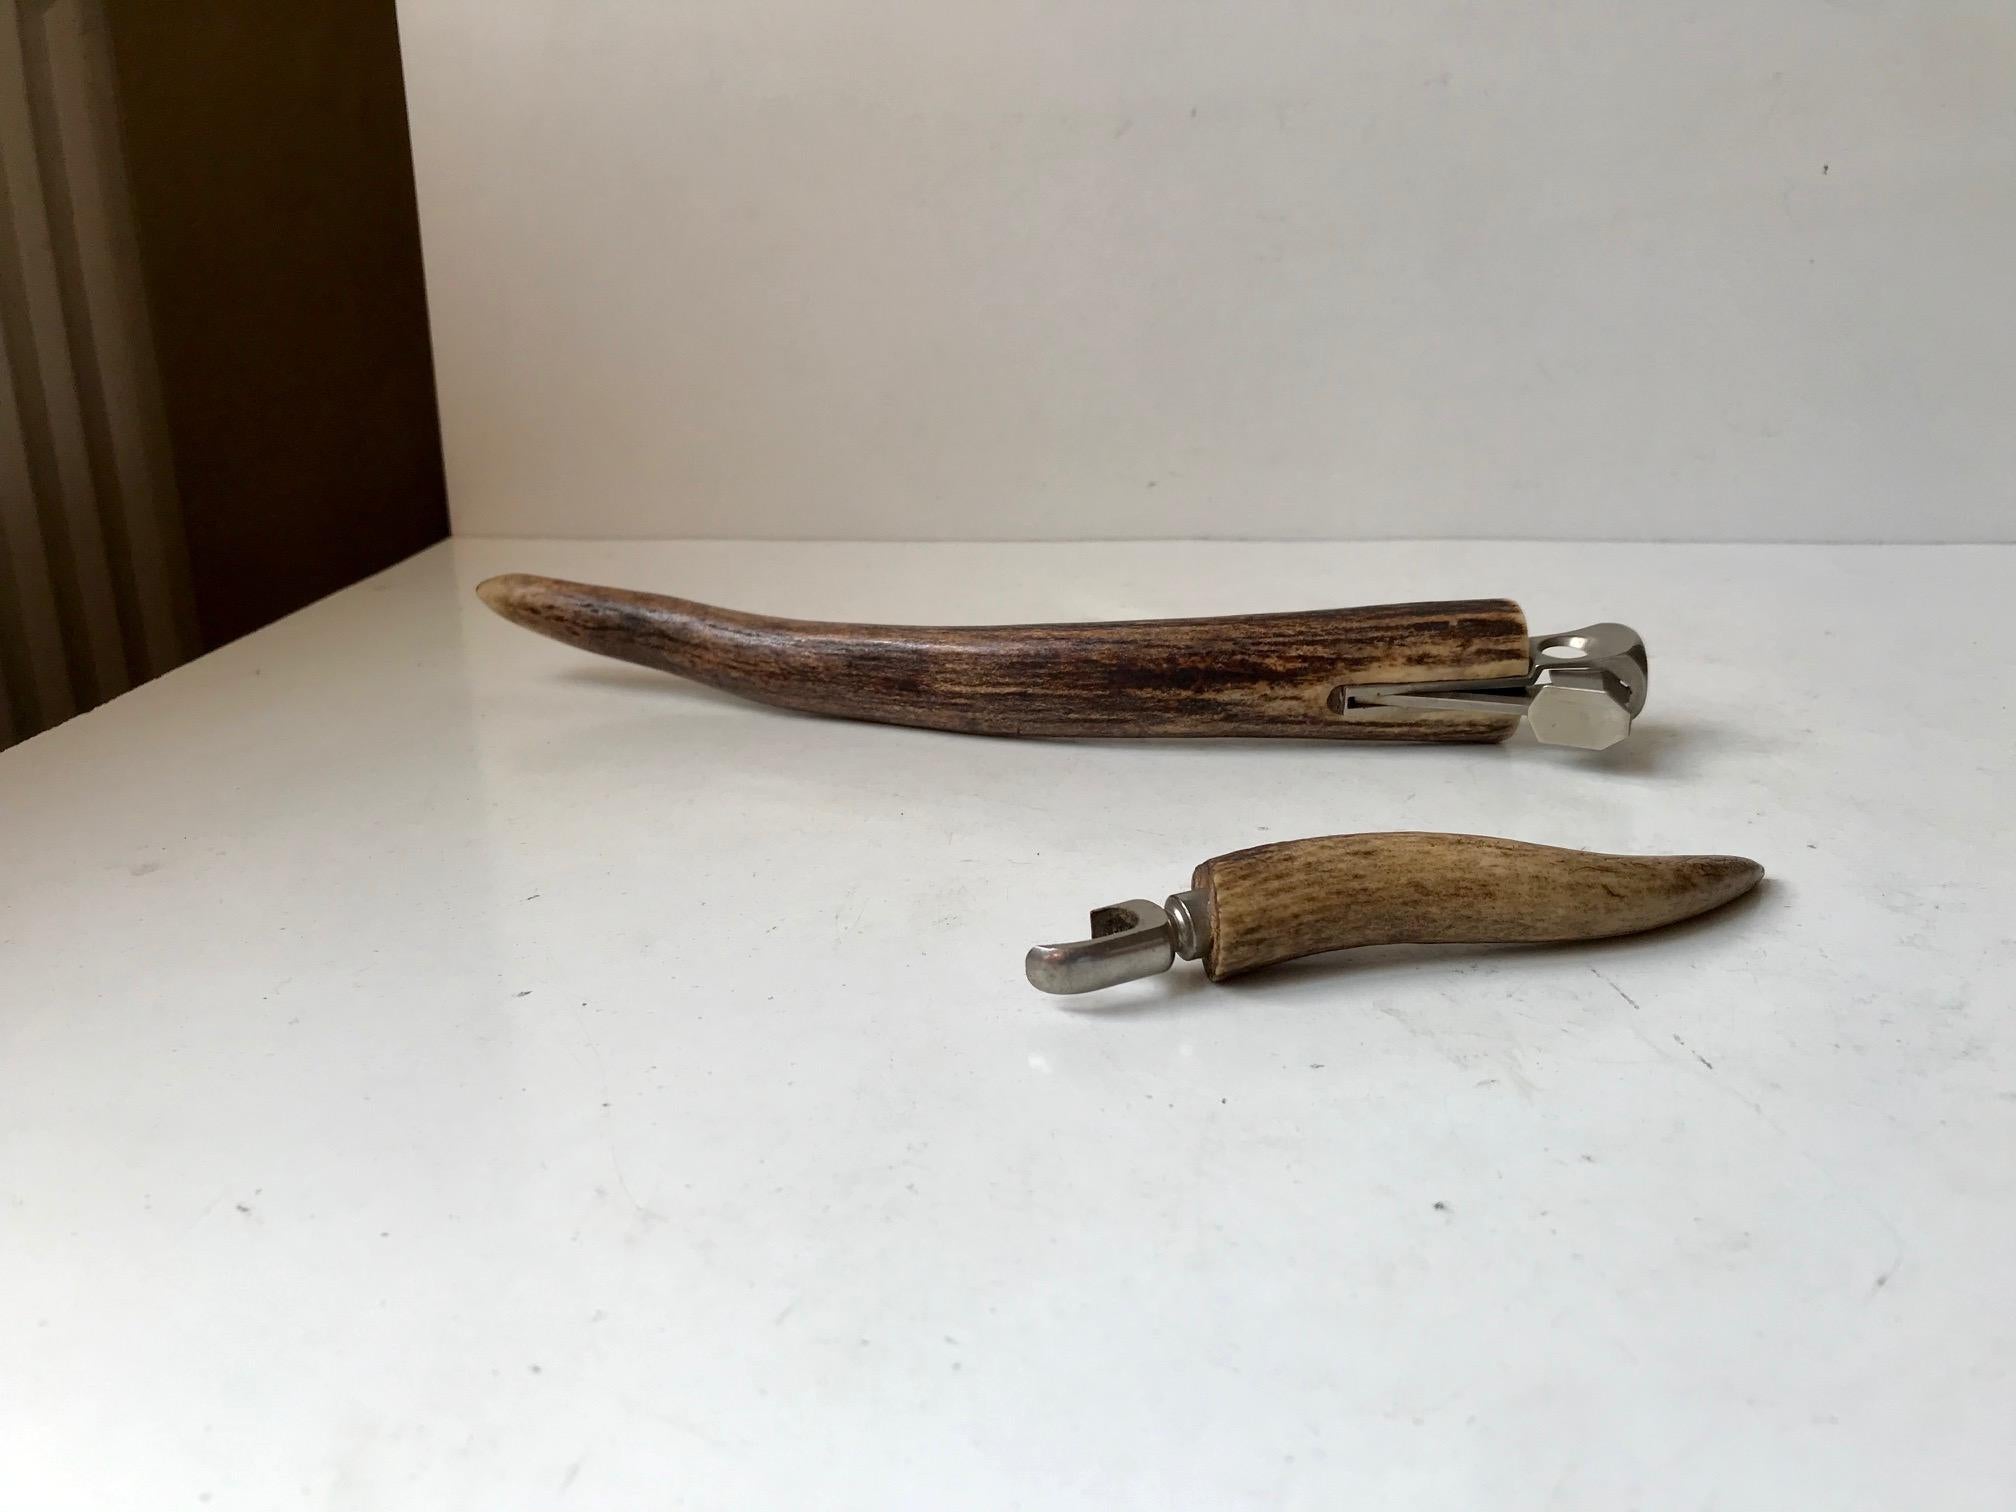 Bar set consisting of a large stag handled cigar cutter (L: 29 cm) and a matching small bottle opener (14 cm). Both of them are continental and presumably made in Germany circa 1960-70. The cigar cutter features a mechanism from Sollingen.